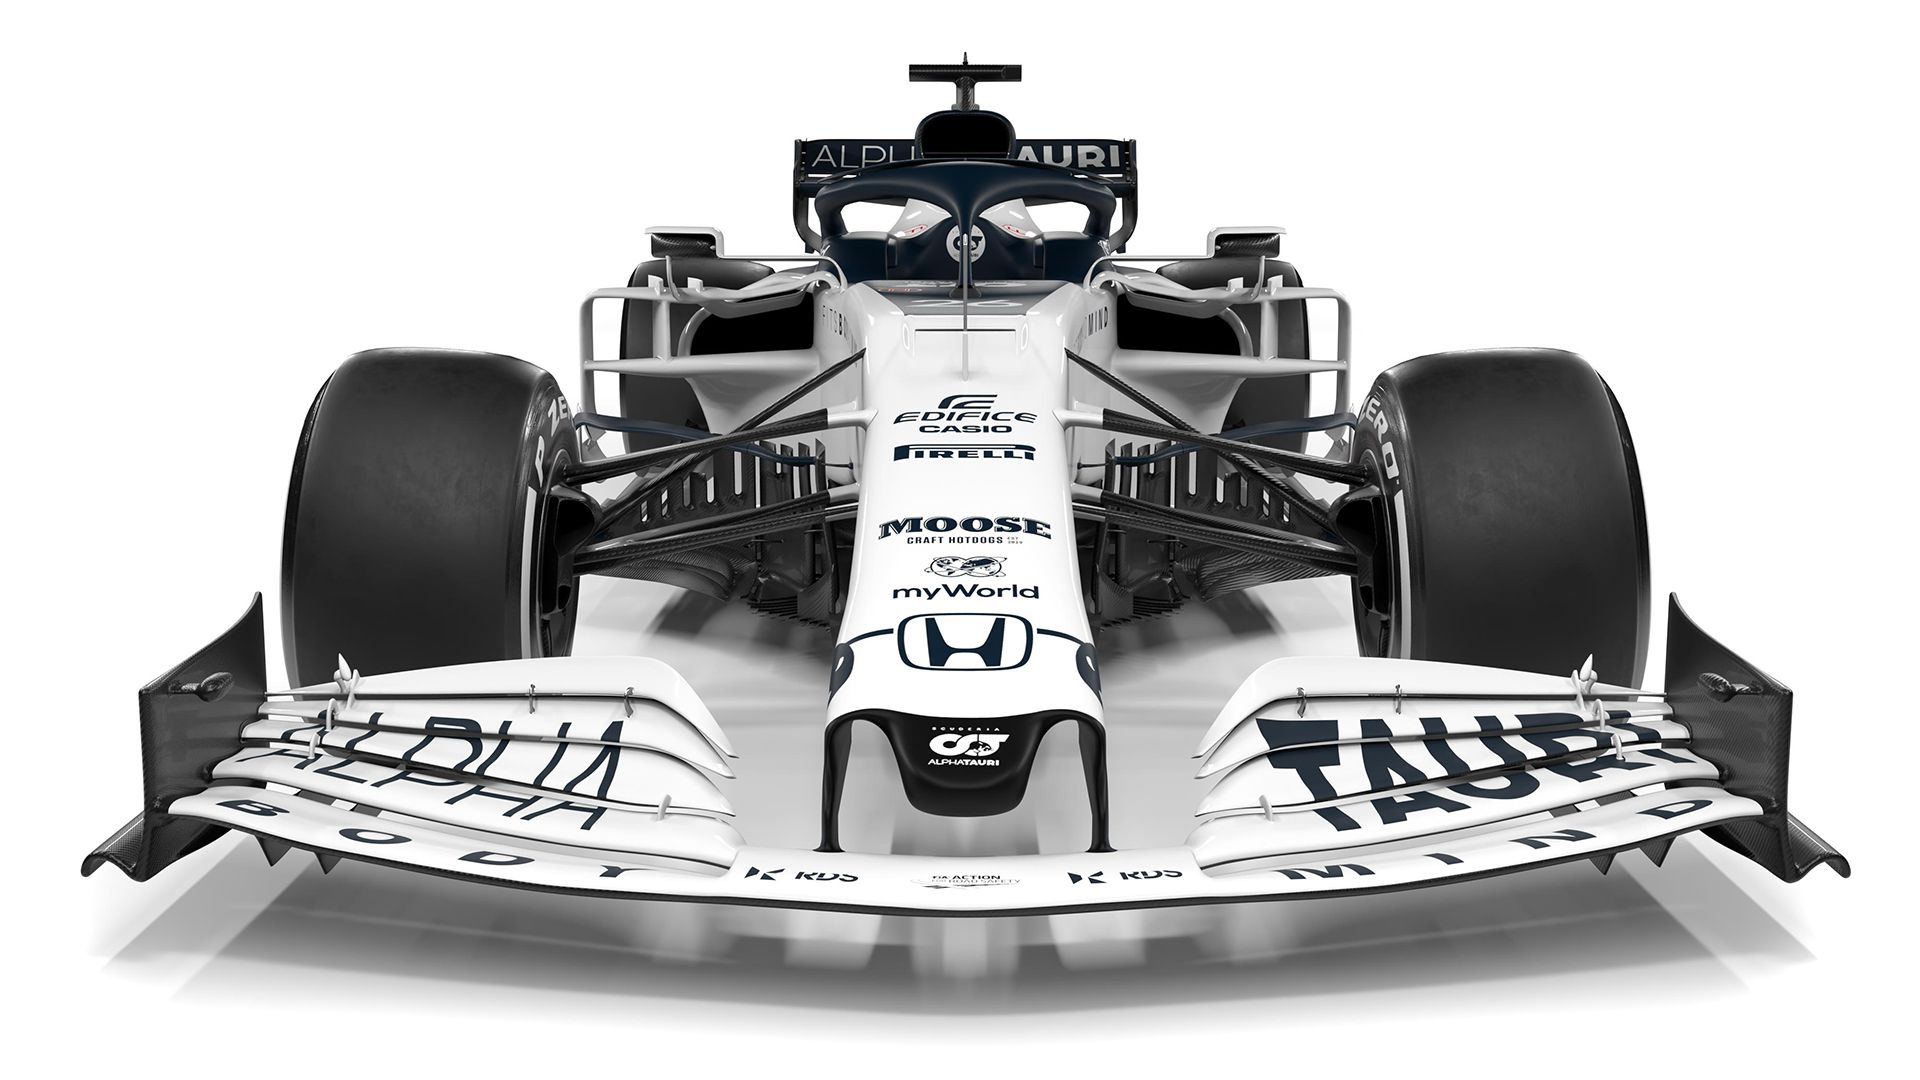 F1 fans react to new AlphaTauri livery after team reveal 2020 car